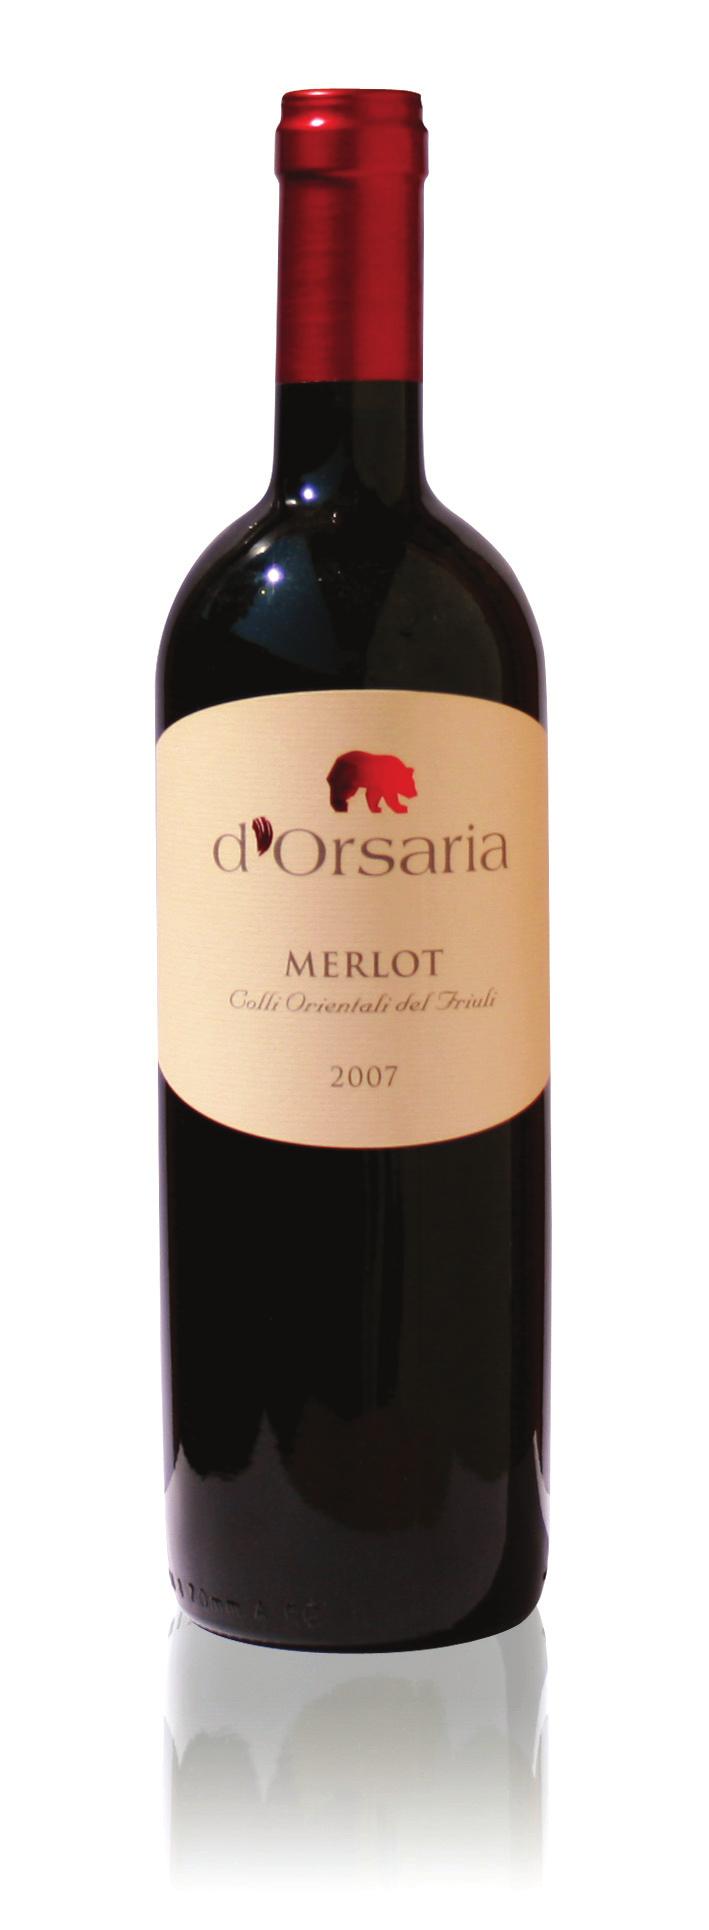 Merlot The wine: Merlot is Friuli s traditional tajut (glass) of red wine, just as Tocai is for white.